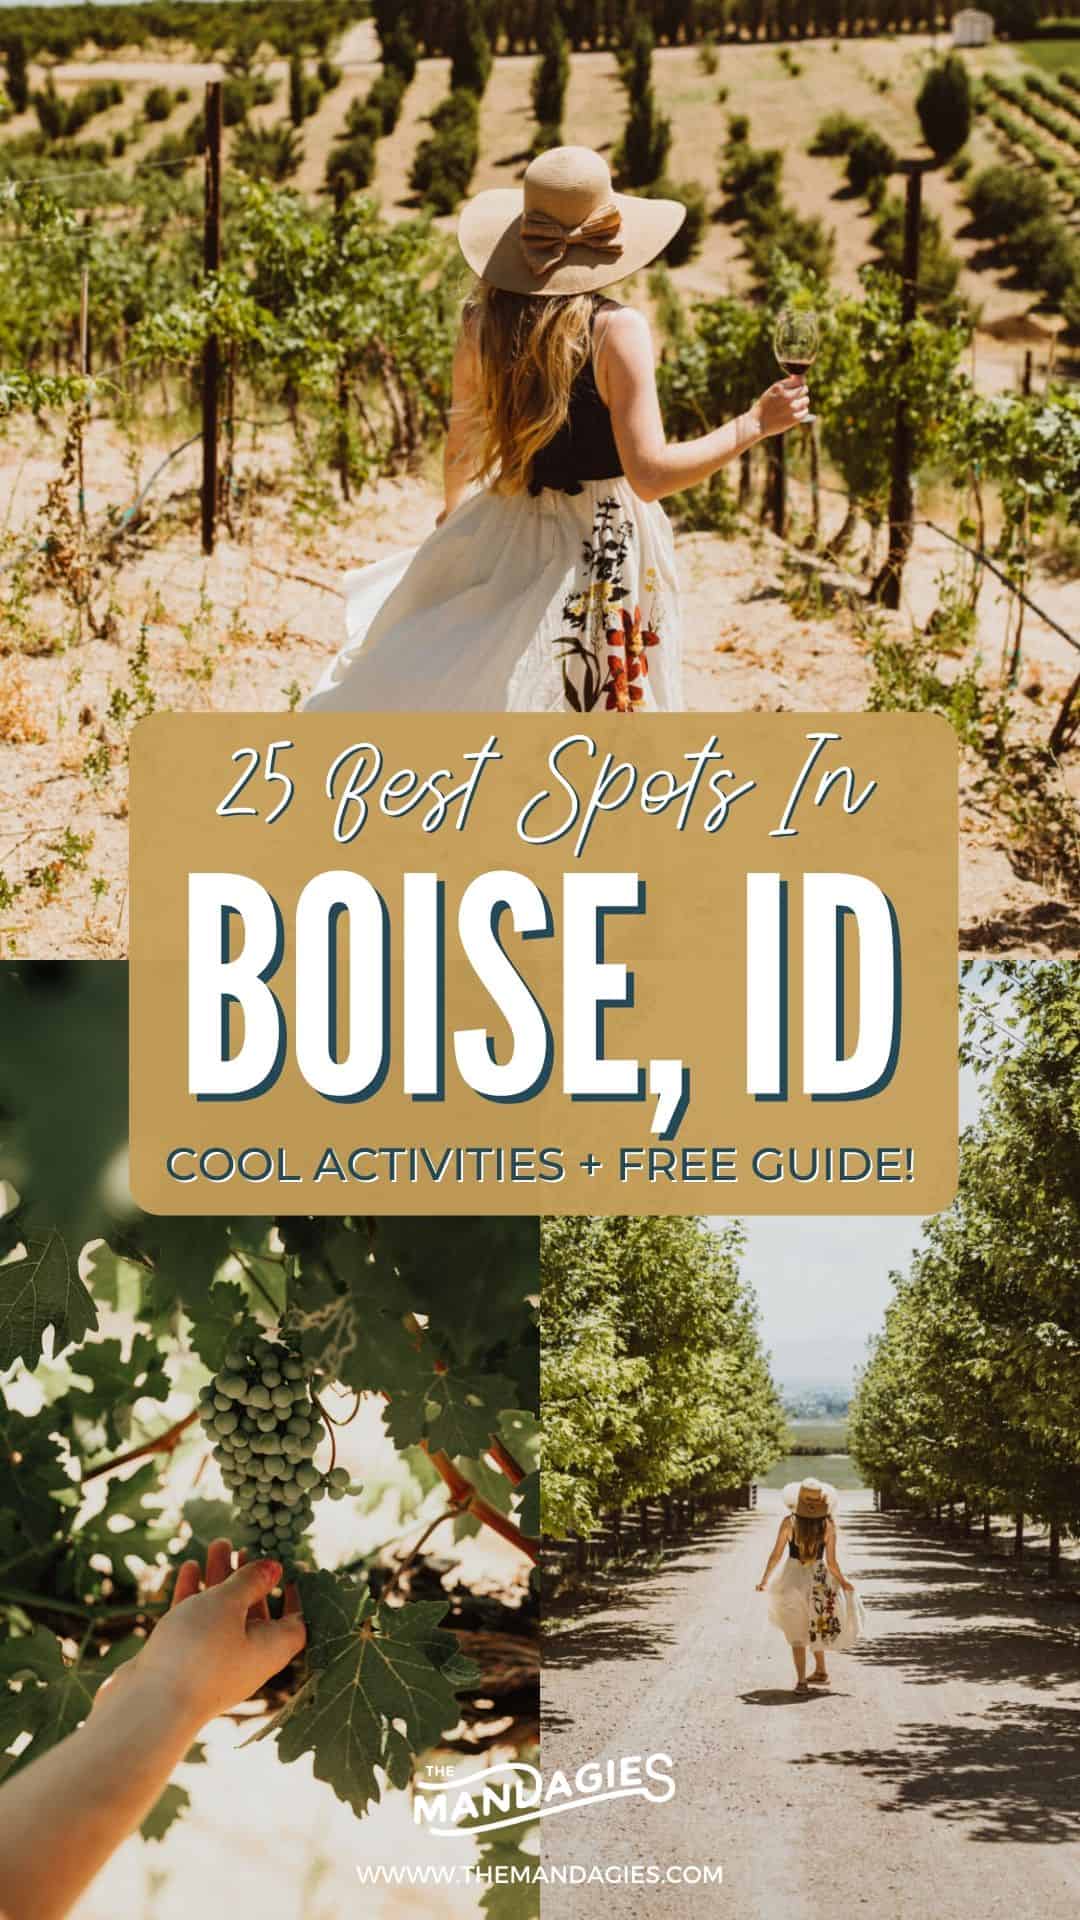 Wondering what cool things do to in Boise, Idaho are? We're sharing the ultimate Boise, Idaho bucket list, complete with restaurants, best hikes, day trips from Boise, and so much more! Save this post for your next epic trip to Boise, Idaho! #boise #idaho #southwestidaho #gemstate #travel #USAtravel #roadtrip #explore #hiking #hotsprings